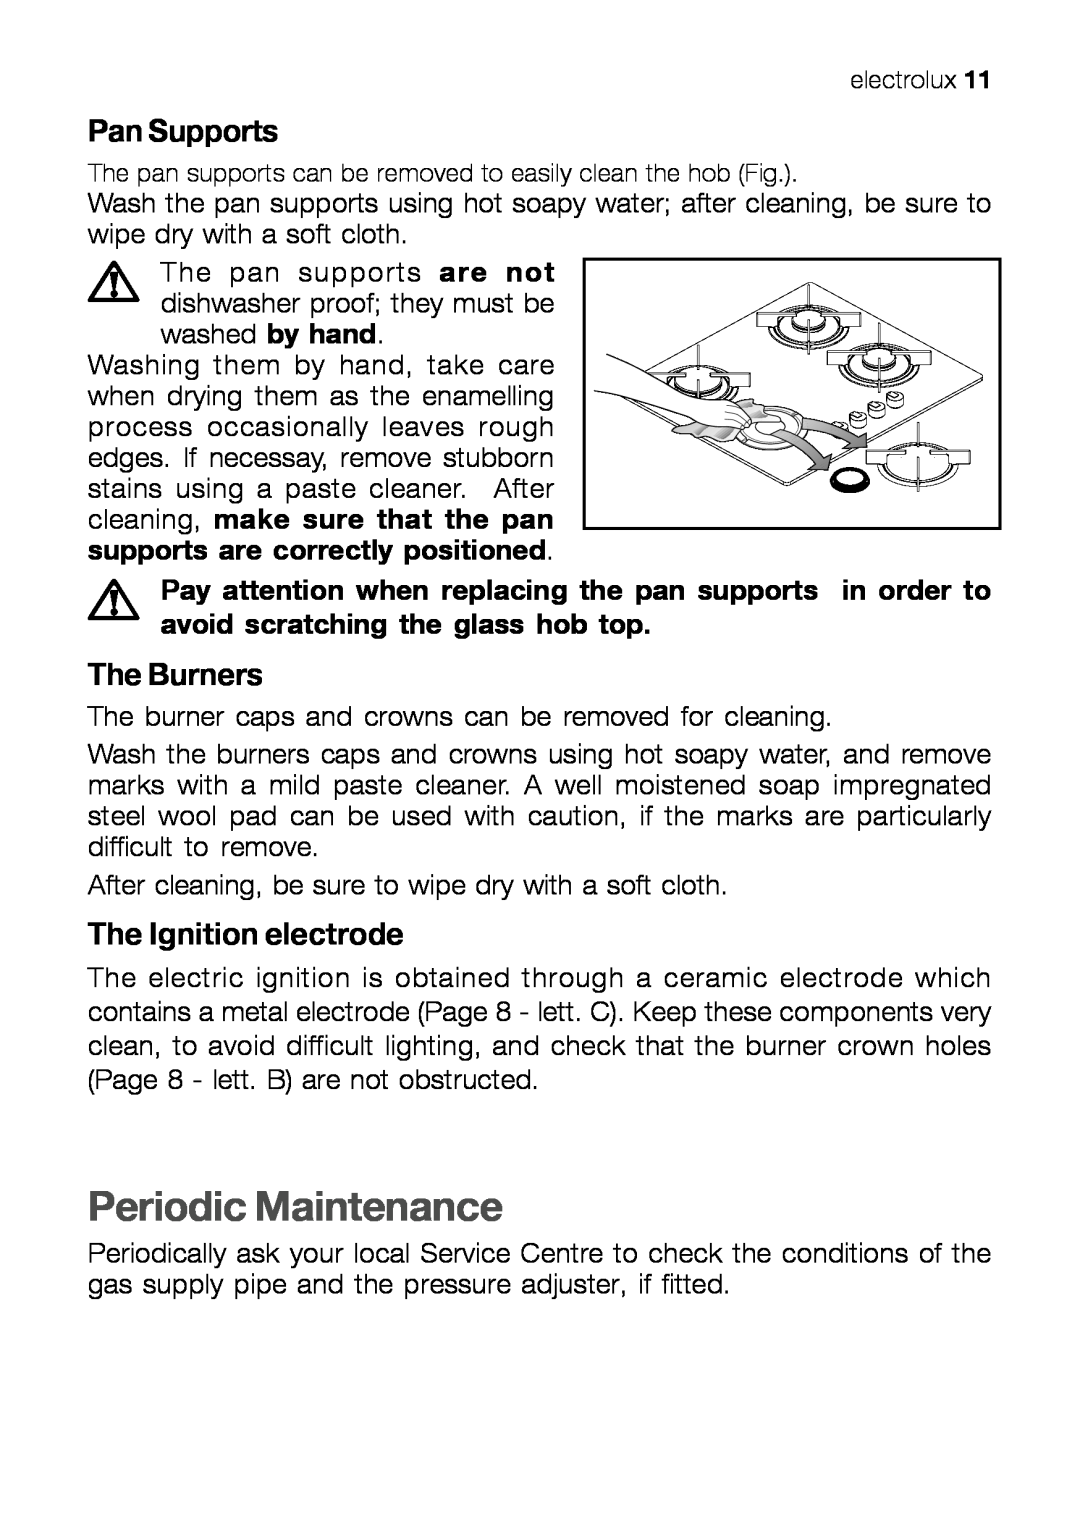 Electrolux EHT 60410 manual Periodic Maintenance, Pan Supports, The Burners, The Ignition electrode 